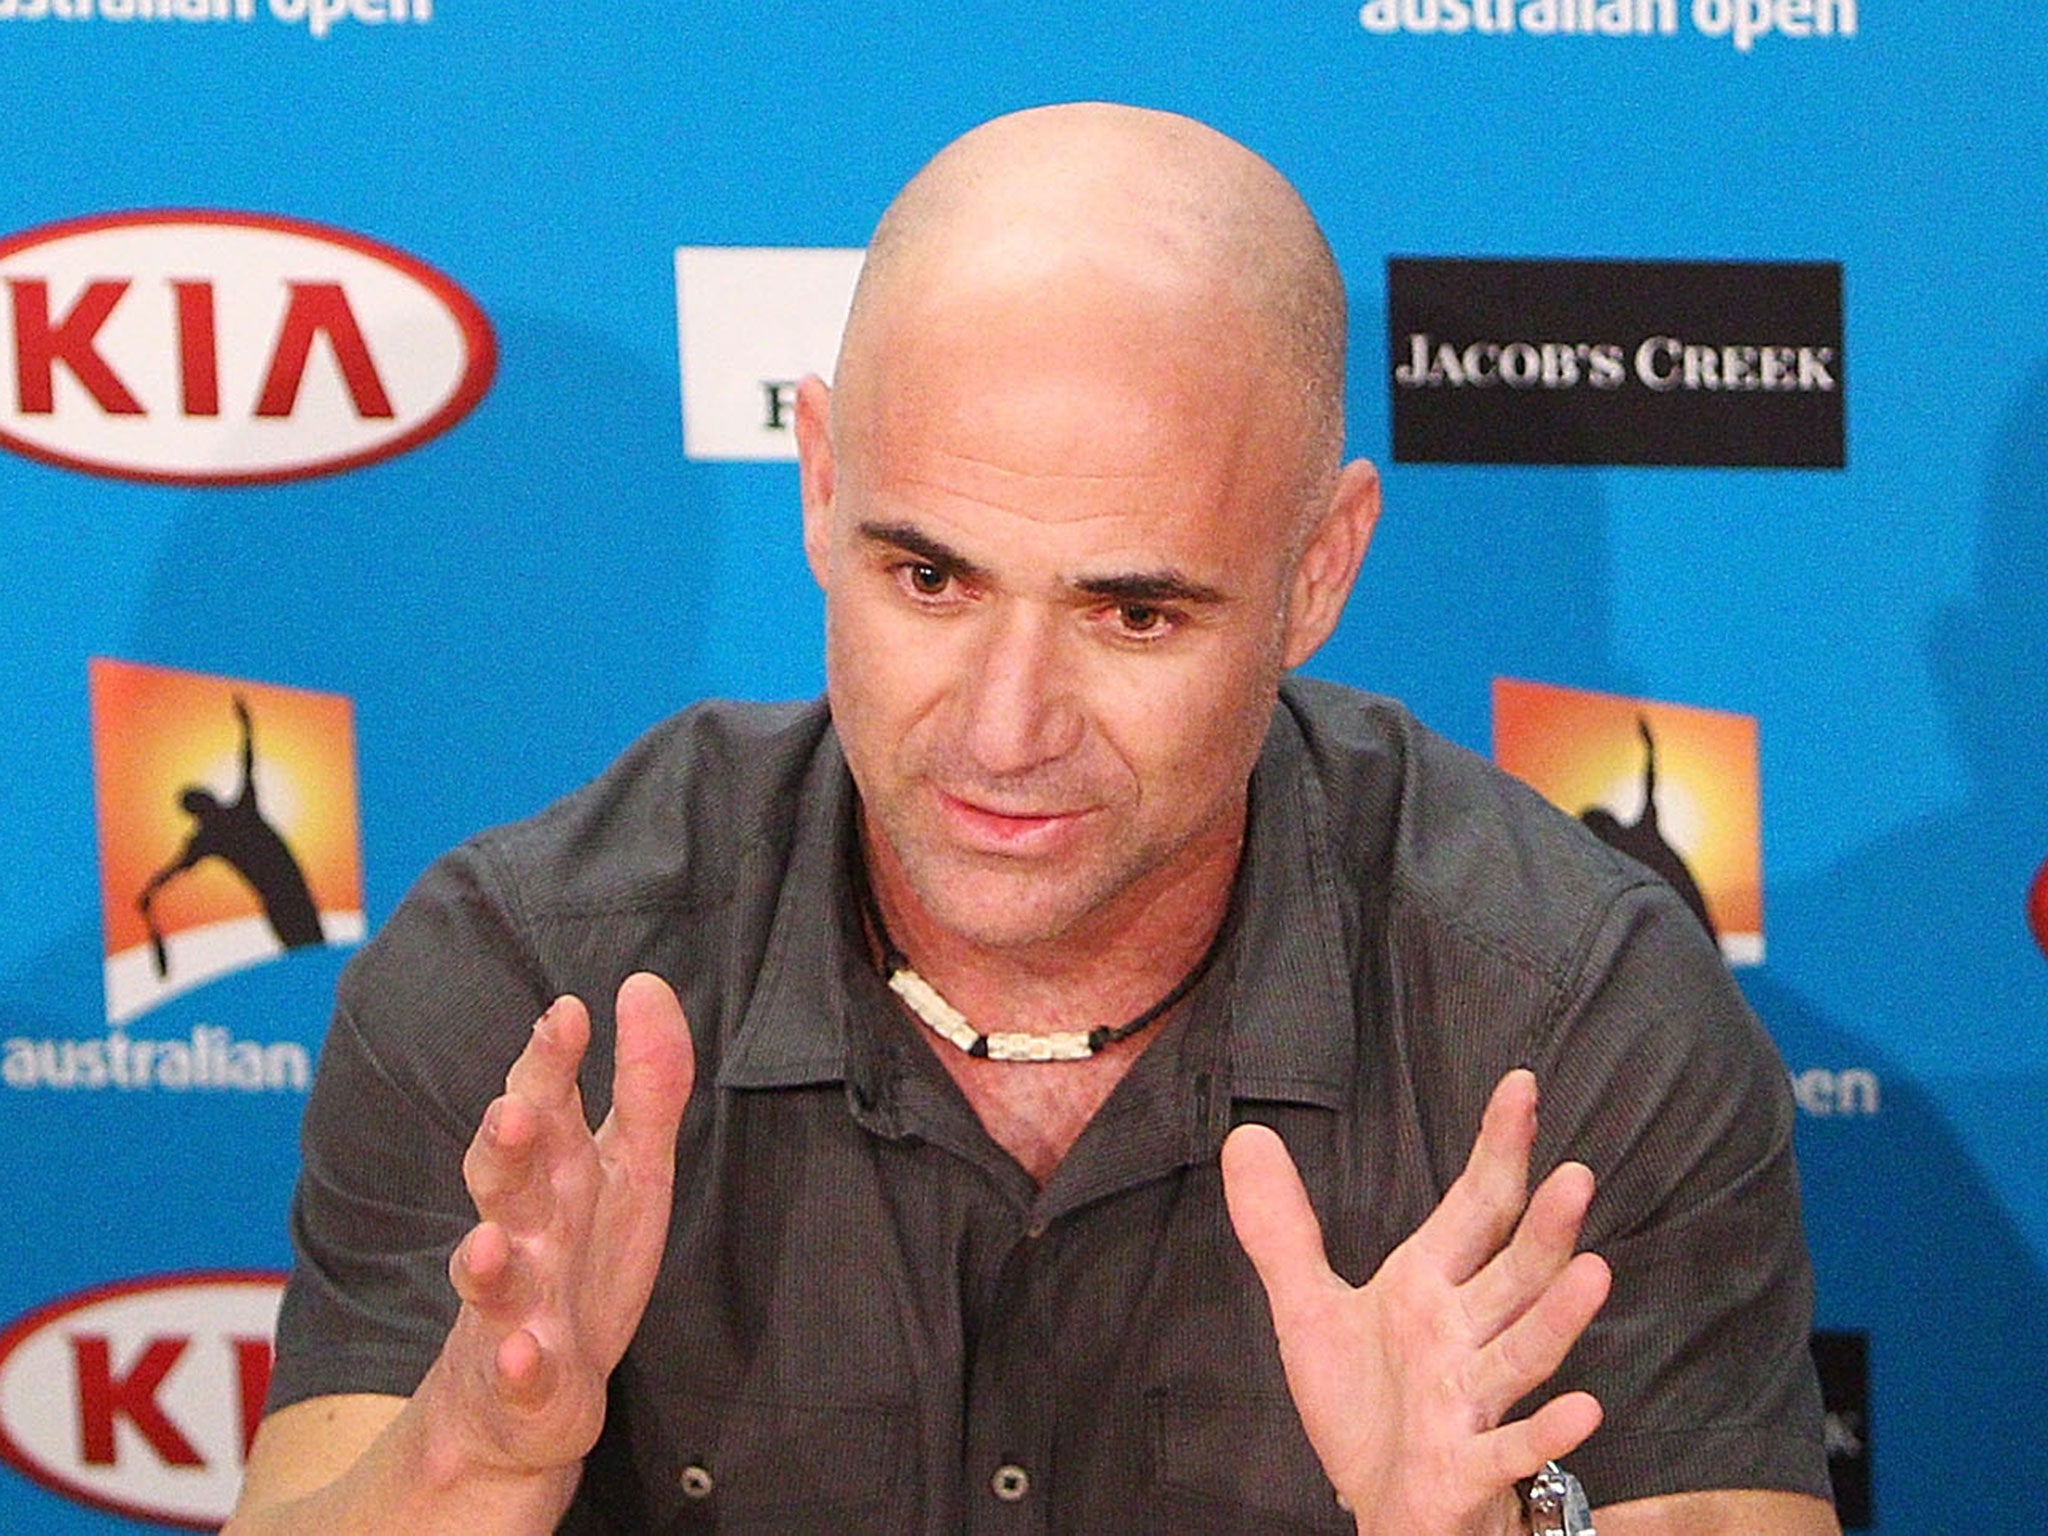 Former tennis player Andre Agassi revealed a failed drug test during his career was covered up